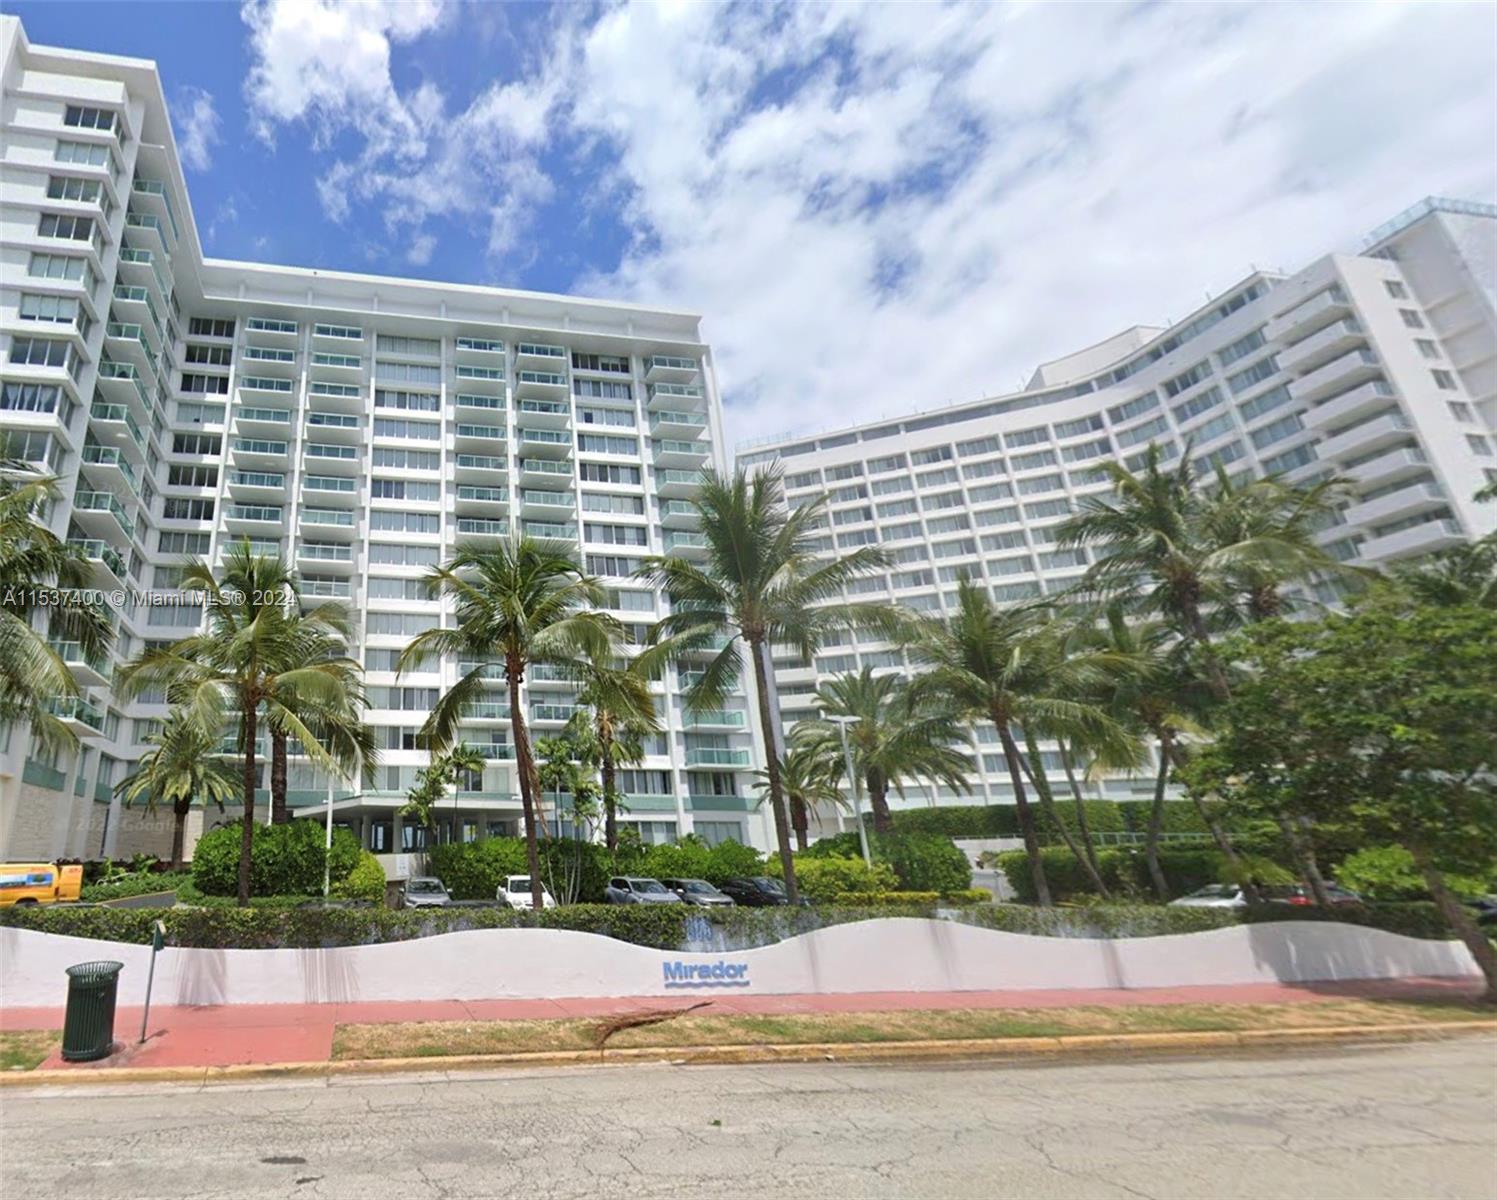 LARGE STUDIO IN THE HEART OF SOUTH BEACH. LOFT STYLE. MAINTENANCE INCLUDES: CABLE, WIFI, FITNESS CENTER. 24 HOUR CONCIERGE, SECURITY, AND VALET SERVICES. INCREDIBLE AMENITIES. WALKING DISTANCE TO SO RESTAURANTS AND SHOPS. SPECIAL ASSESSMENT FROM APRIL 2016 TO 2028 OF $274.85 AND ANOTHER ONE FROM JAN 2021 TO 2036 OF $363.41. PROOF OF FUNDS AND SCHEDULED SHOWING REQUIRED AS TENANT IN PLACE PAYING $2300 UNTIL JUNE 2024. 
TENANT OCCUPIED. PROOF OF FUNDS REQUIRED. TEXT LISTING AGENT FOR SHOWING.